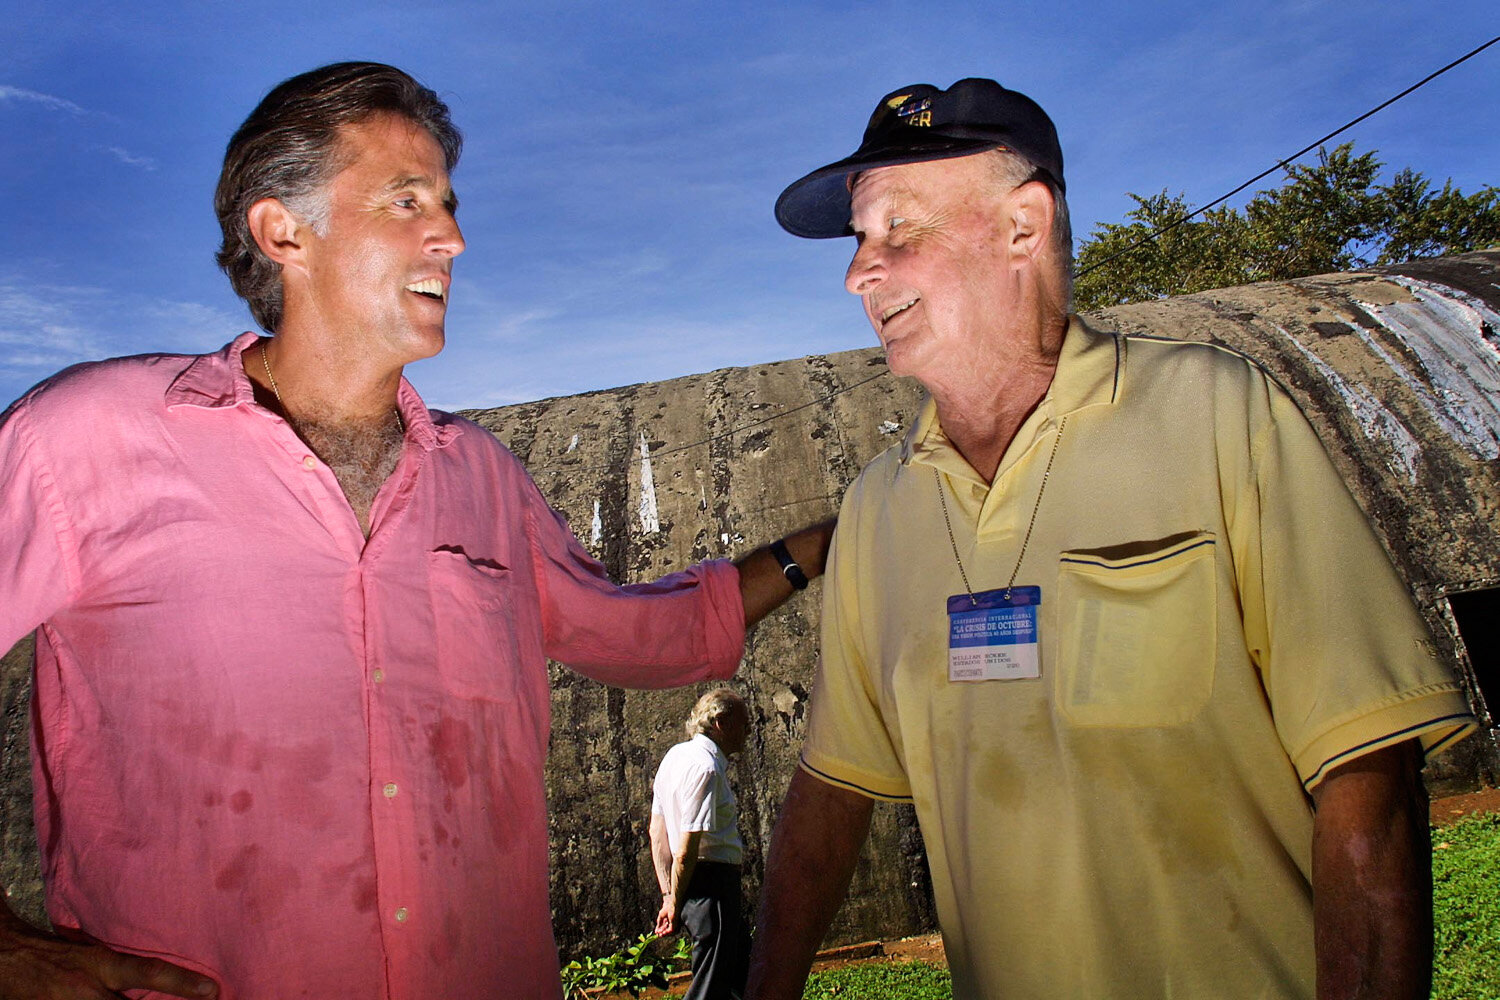  Cristopher Kennedy, actor and nephew of J.F. Kennedy talks to William Ecker, who was the pilot who flew over Cuba on October 23, 1962 during the Cuba crisis and took the reconnaissance photos that gave the Kennedy administration the proof that sovie